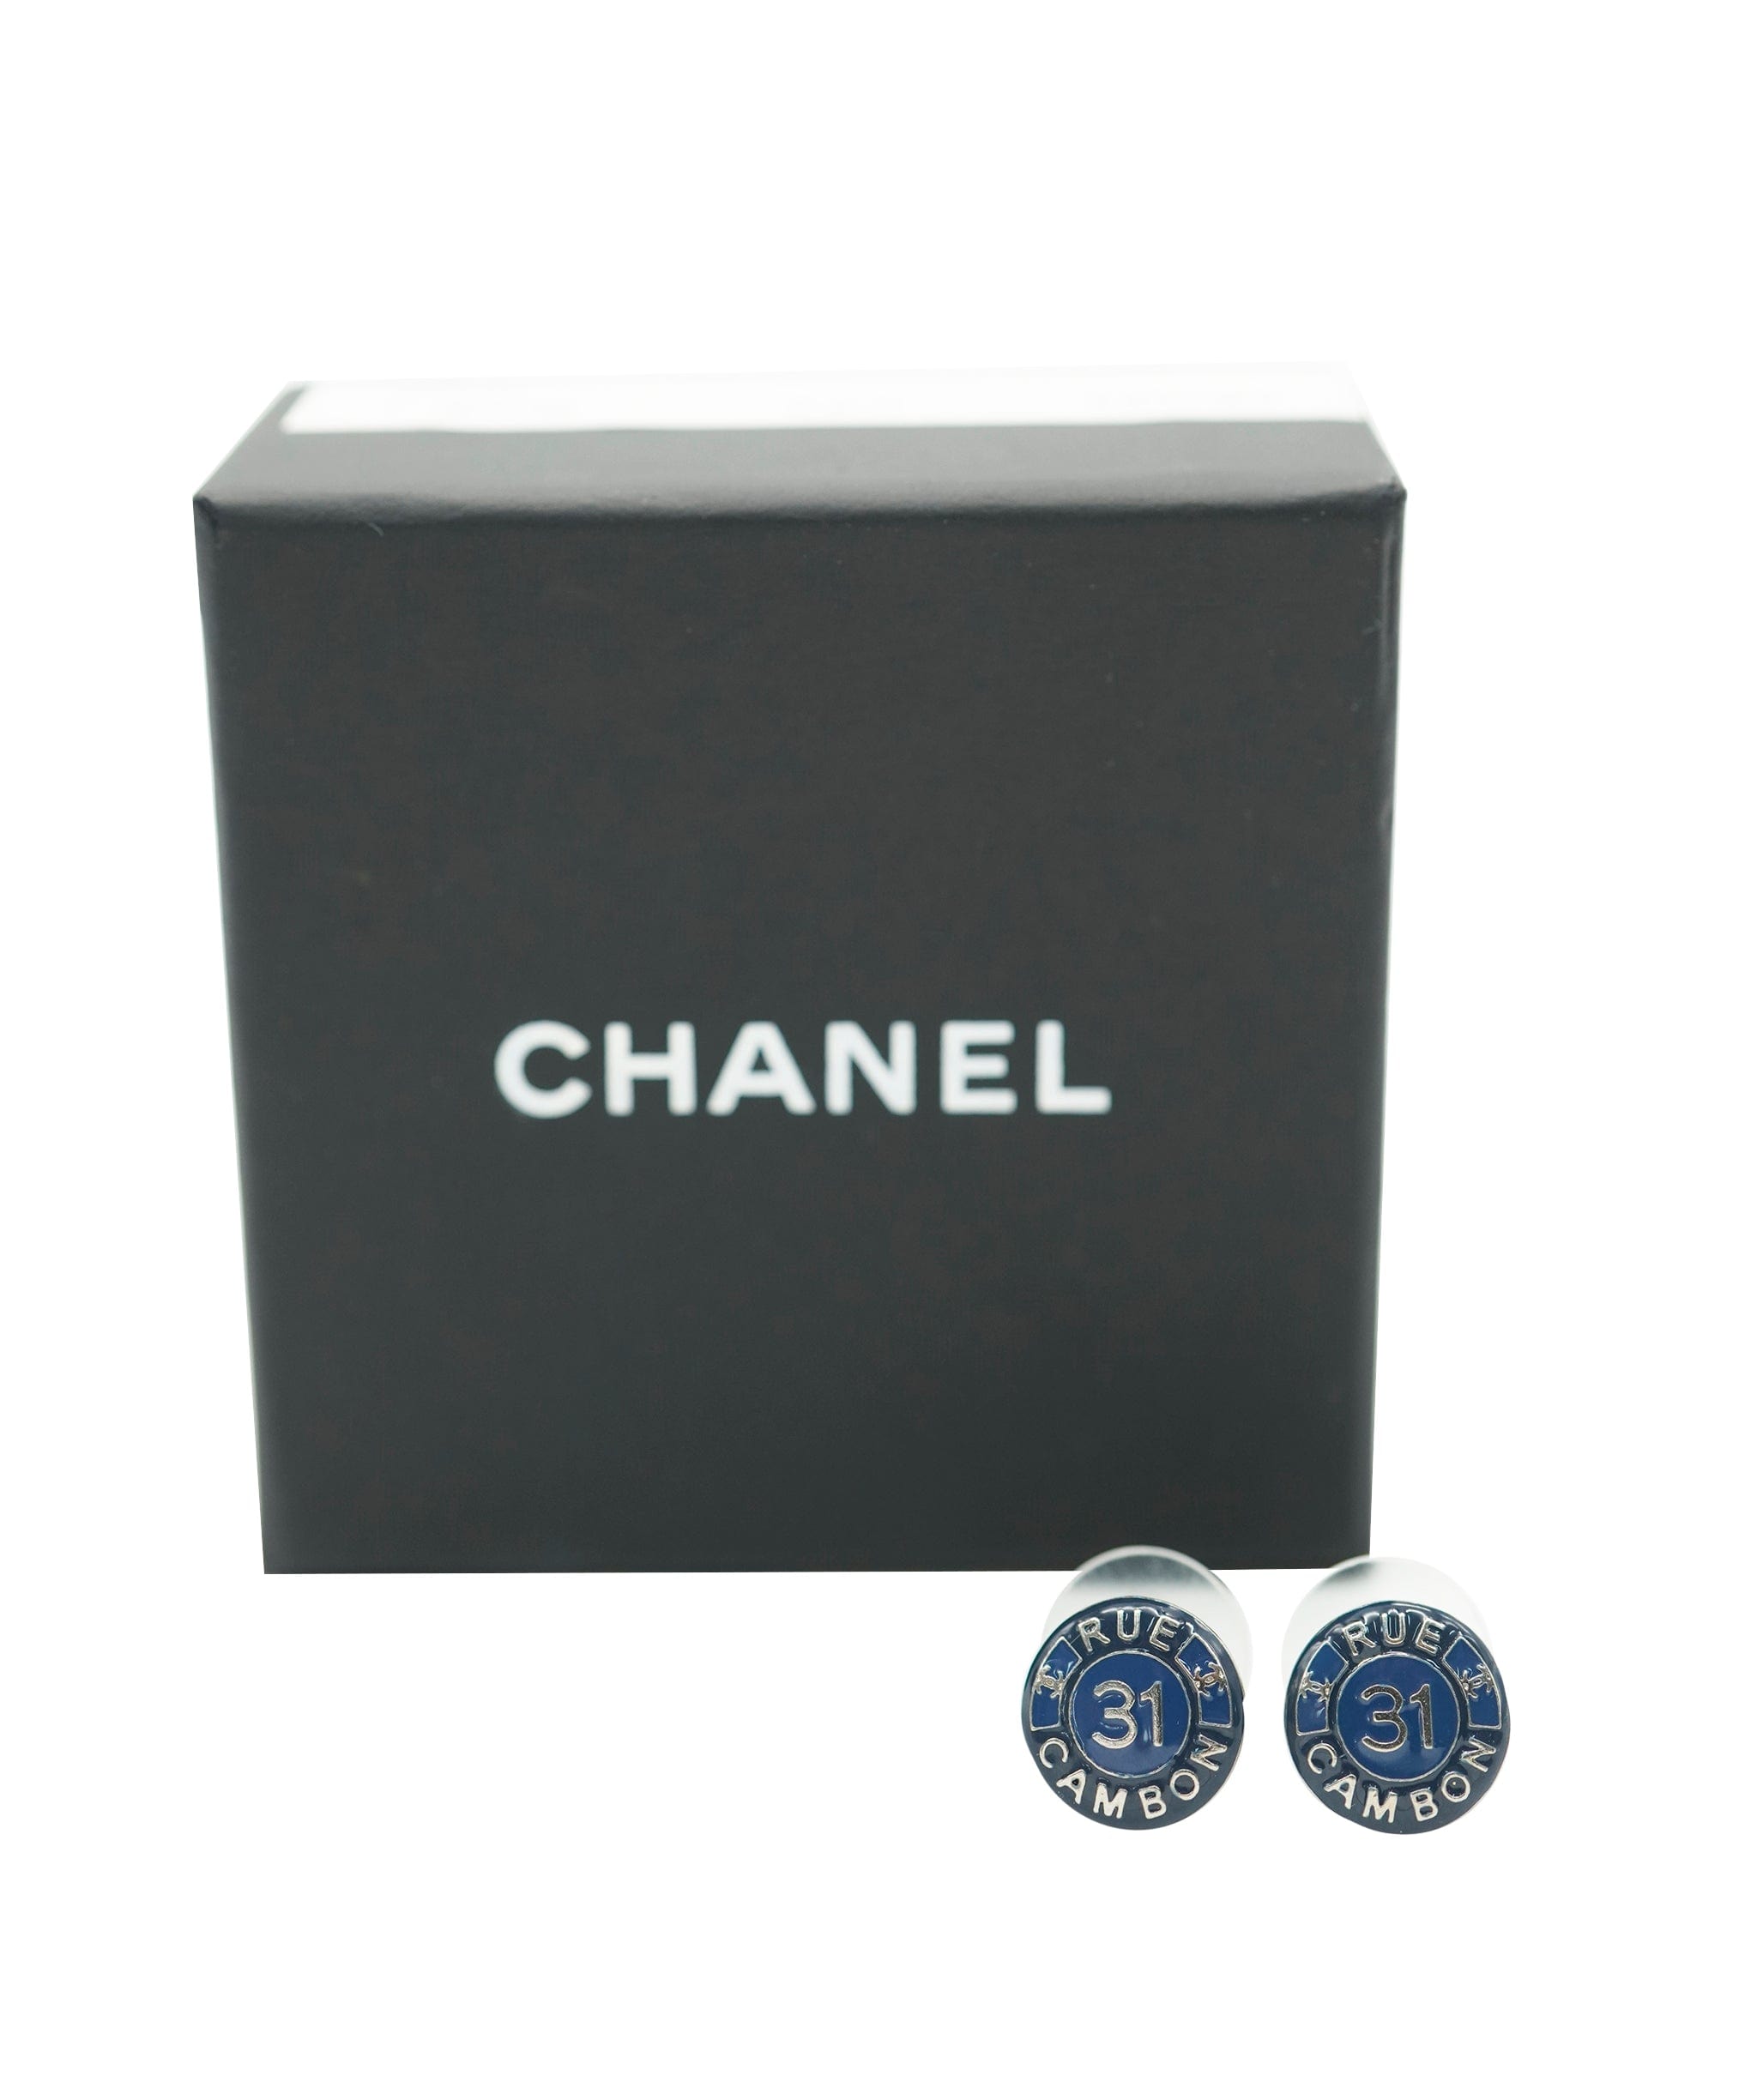 Chanel Chanel blue rue 31 silver cambon studs with box AJL0185